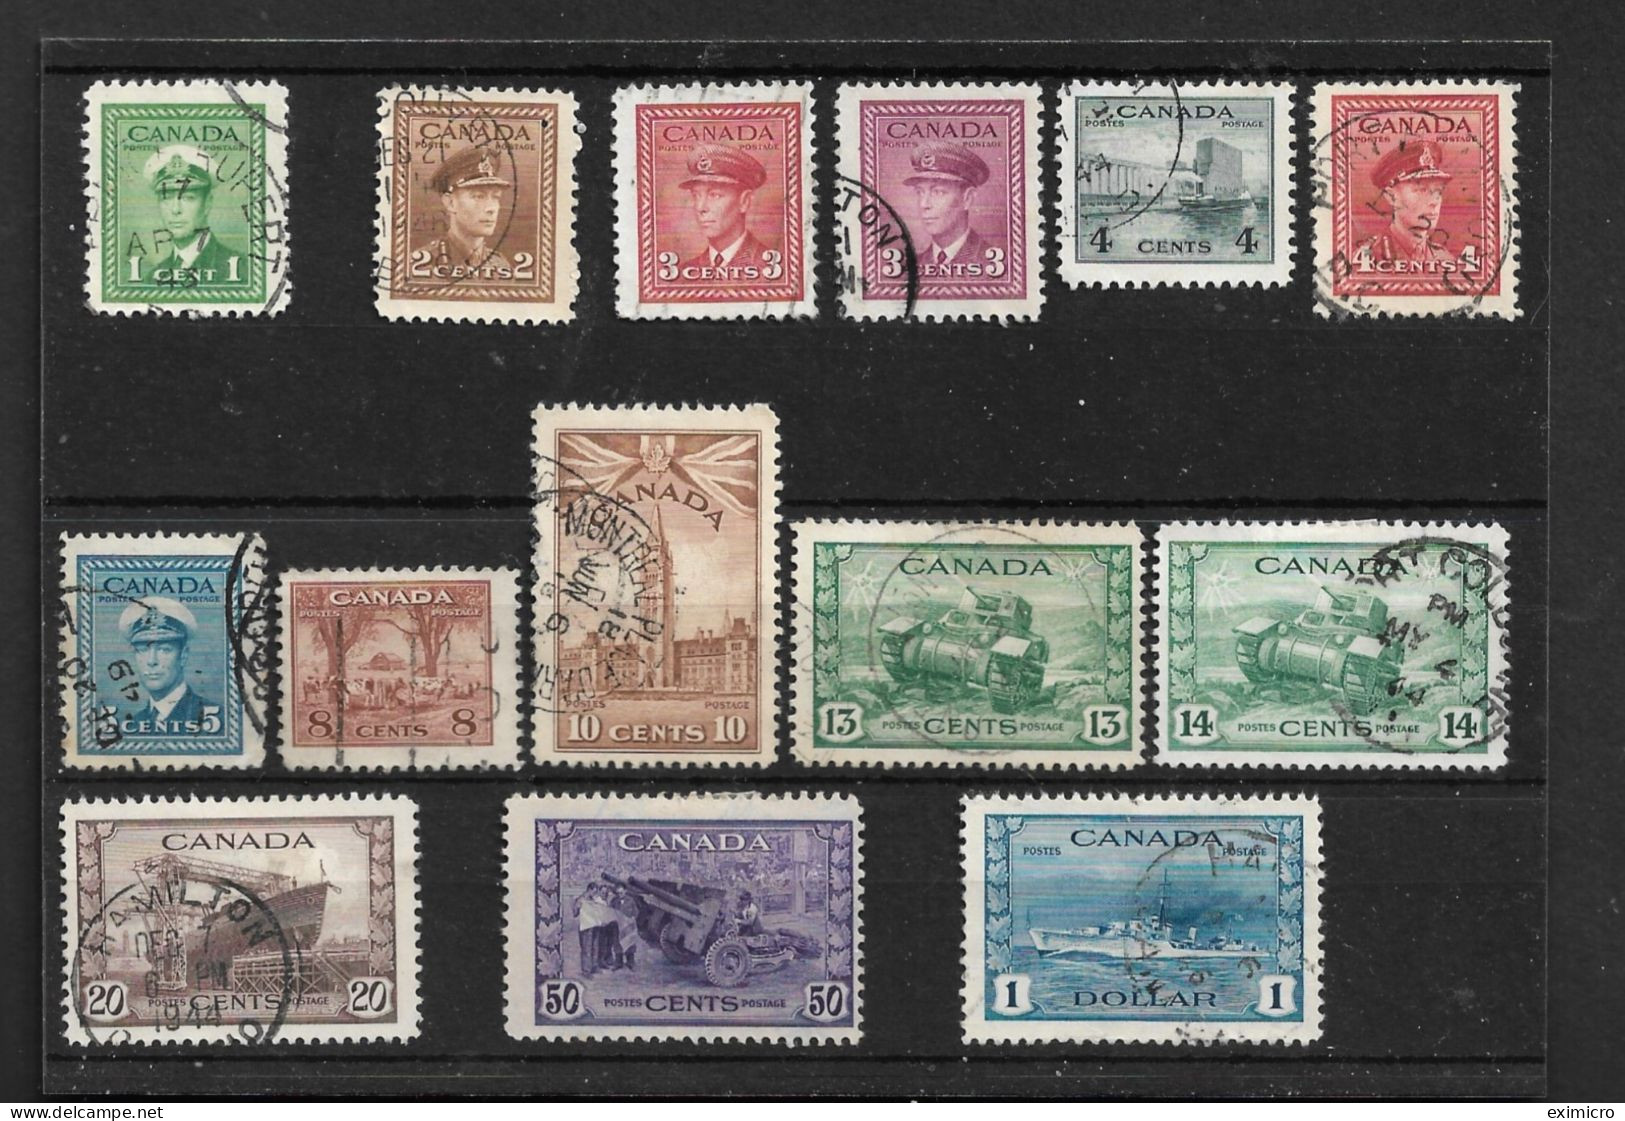 CANADA 1942 - 1948 SET SG 375/388 FINE USED Cat £40 - Used Stamps